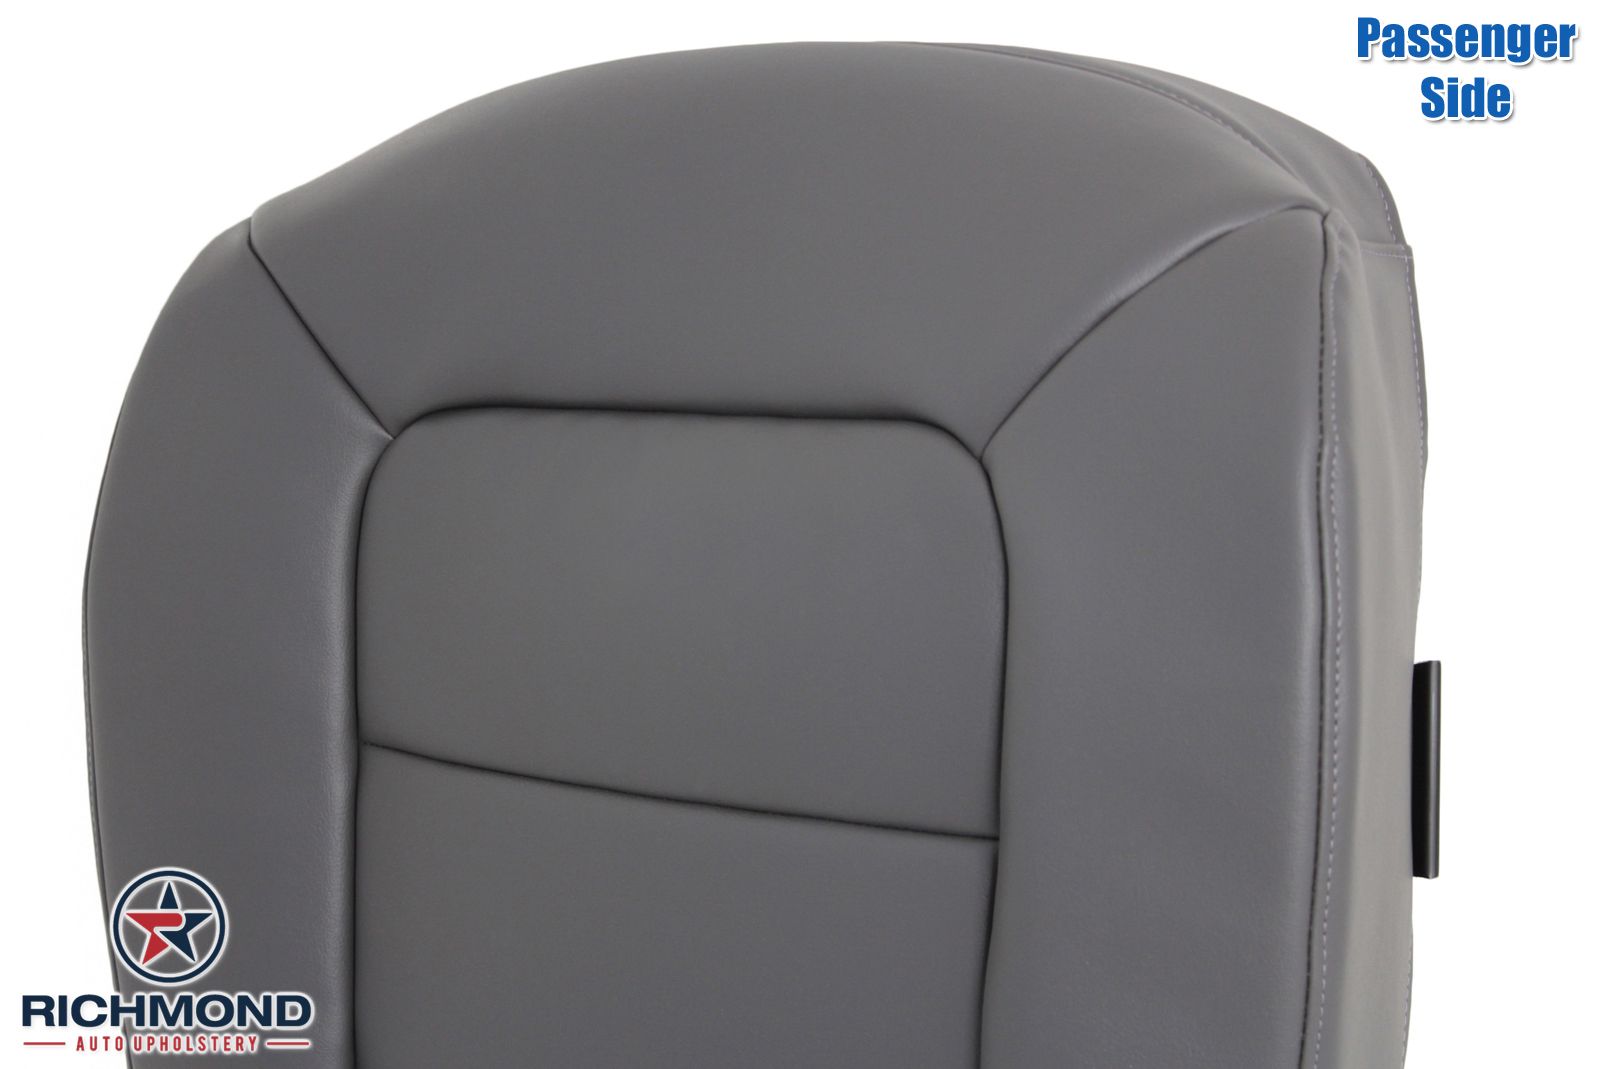 2002 Ford Explorer Sport Trac XLT XLS -Passenger Bottom Leather Seat Cover Gray | eBay 2002 Ford Explorer Sport Trac Factory Bed Cover